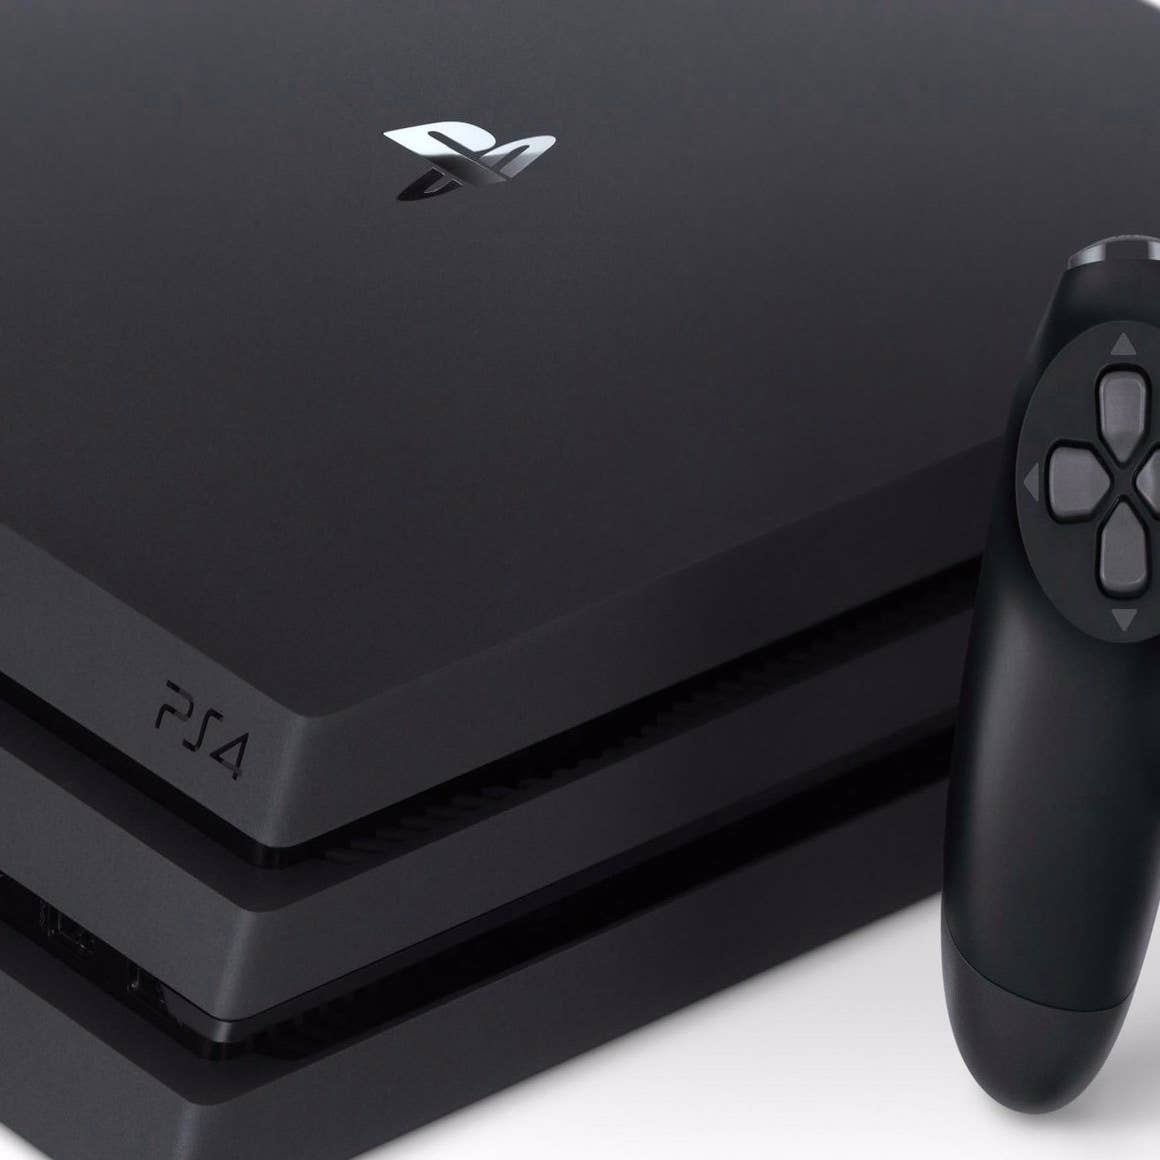 27 Pictures of the PS4 Pro and the New Slimmer PS4